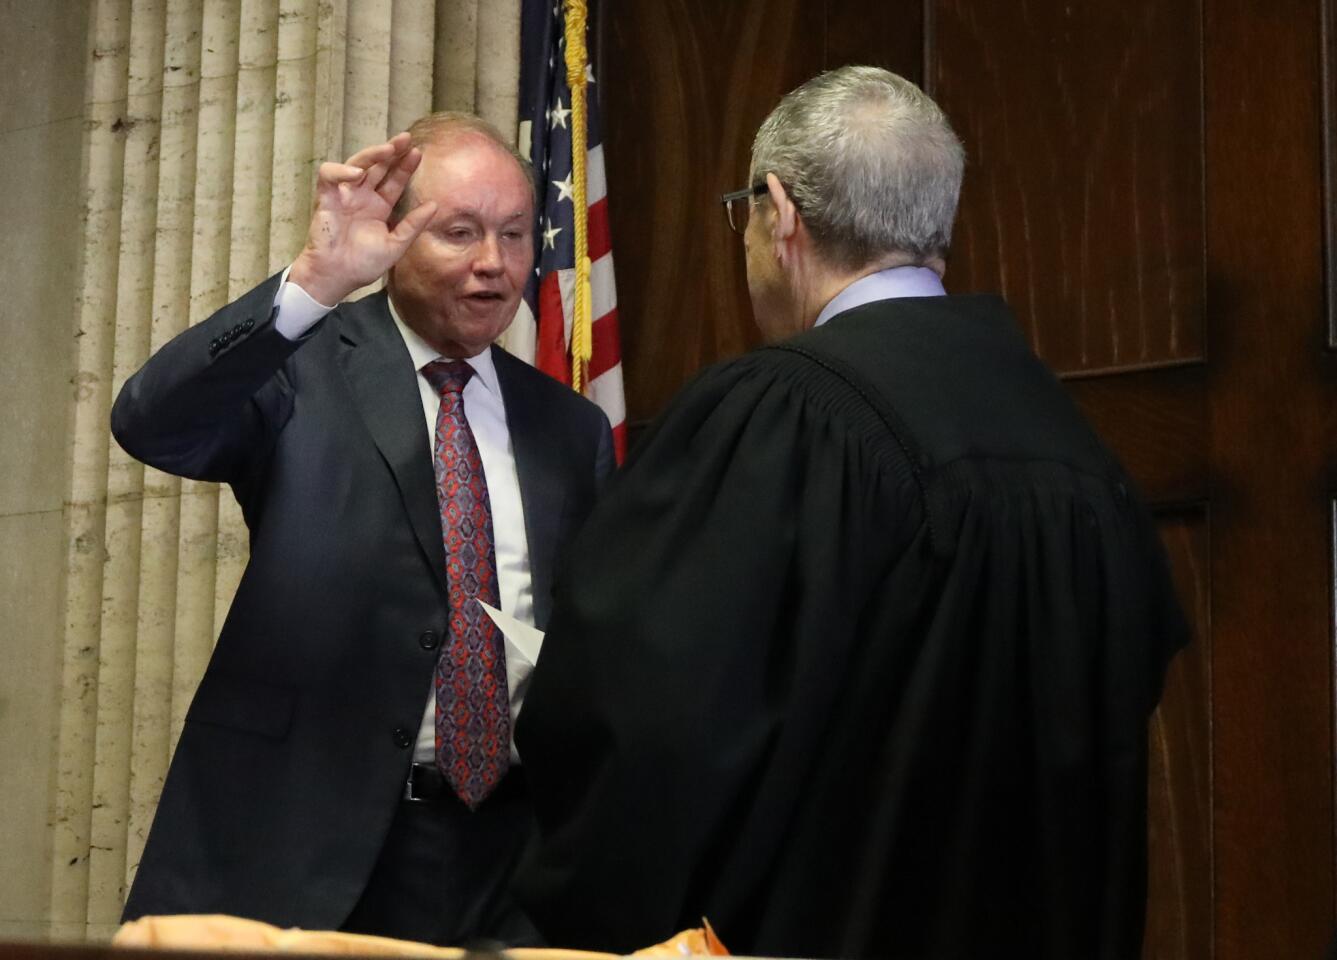 Former U.S. Attorney Dan Webb takes the oath of special prosecutor during a status hearing concerning actor Jussie Smollett at the Leighton Criminal Court Building on Aug. 23, 2019.